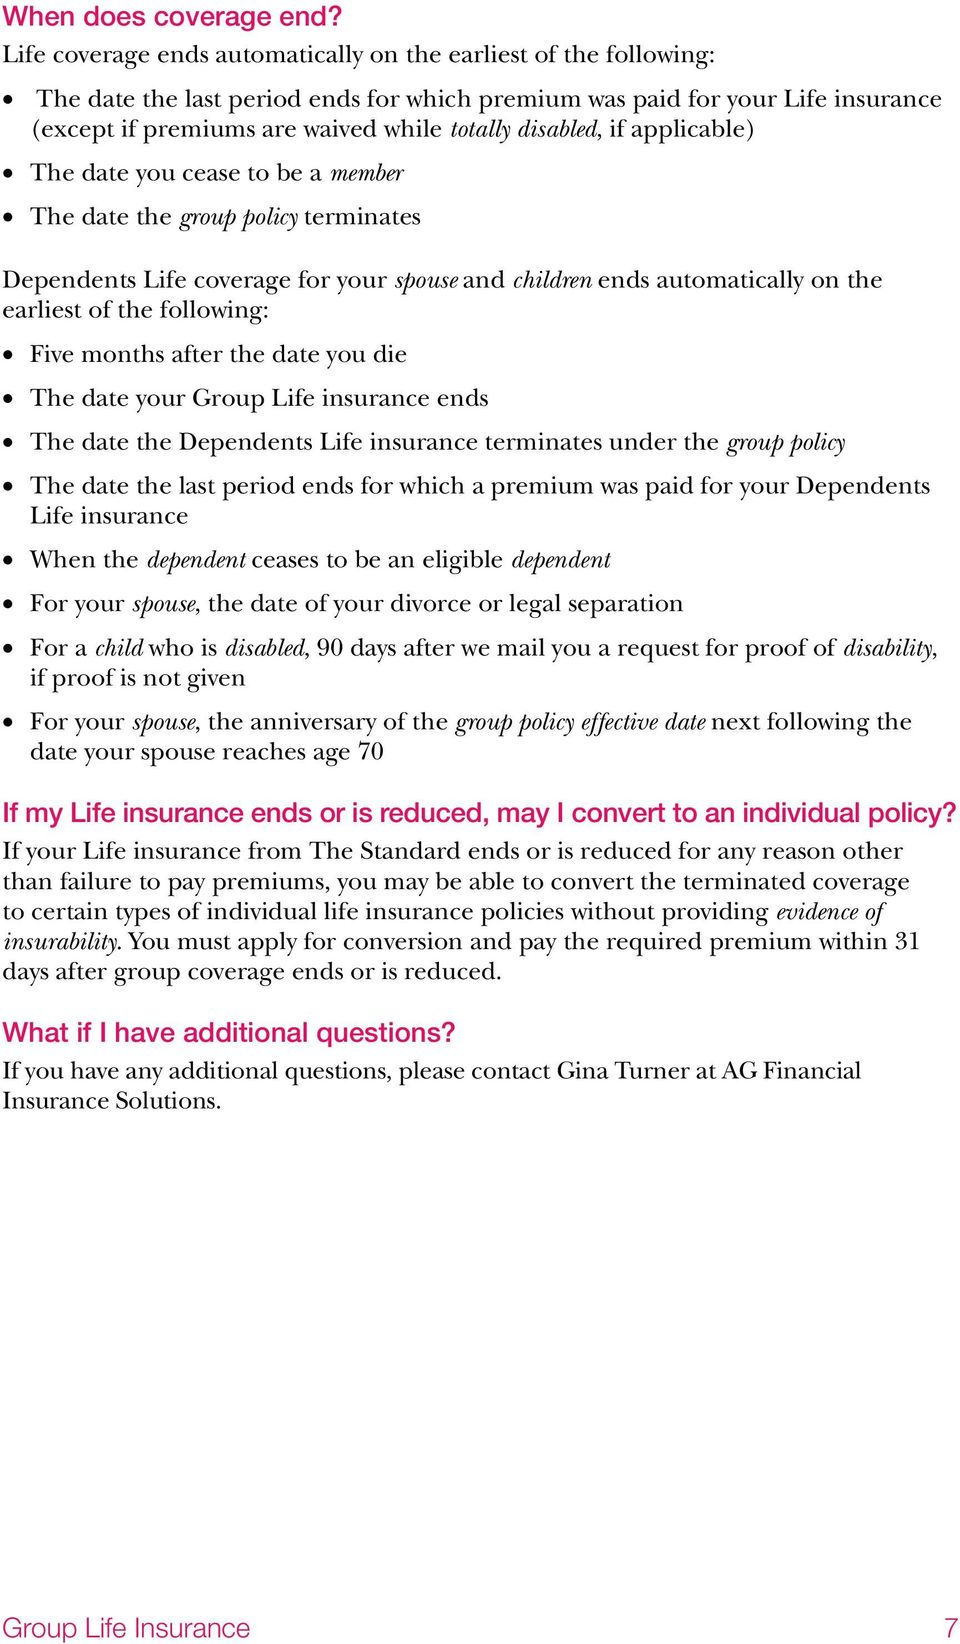 disabled, if applicable) The date you cease to be a member The date the group policy terminates Dependents Life coverage for your spouse and children ends automatically on the earliest of the